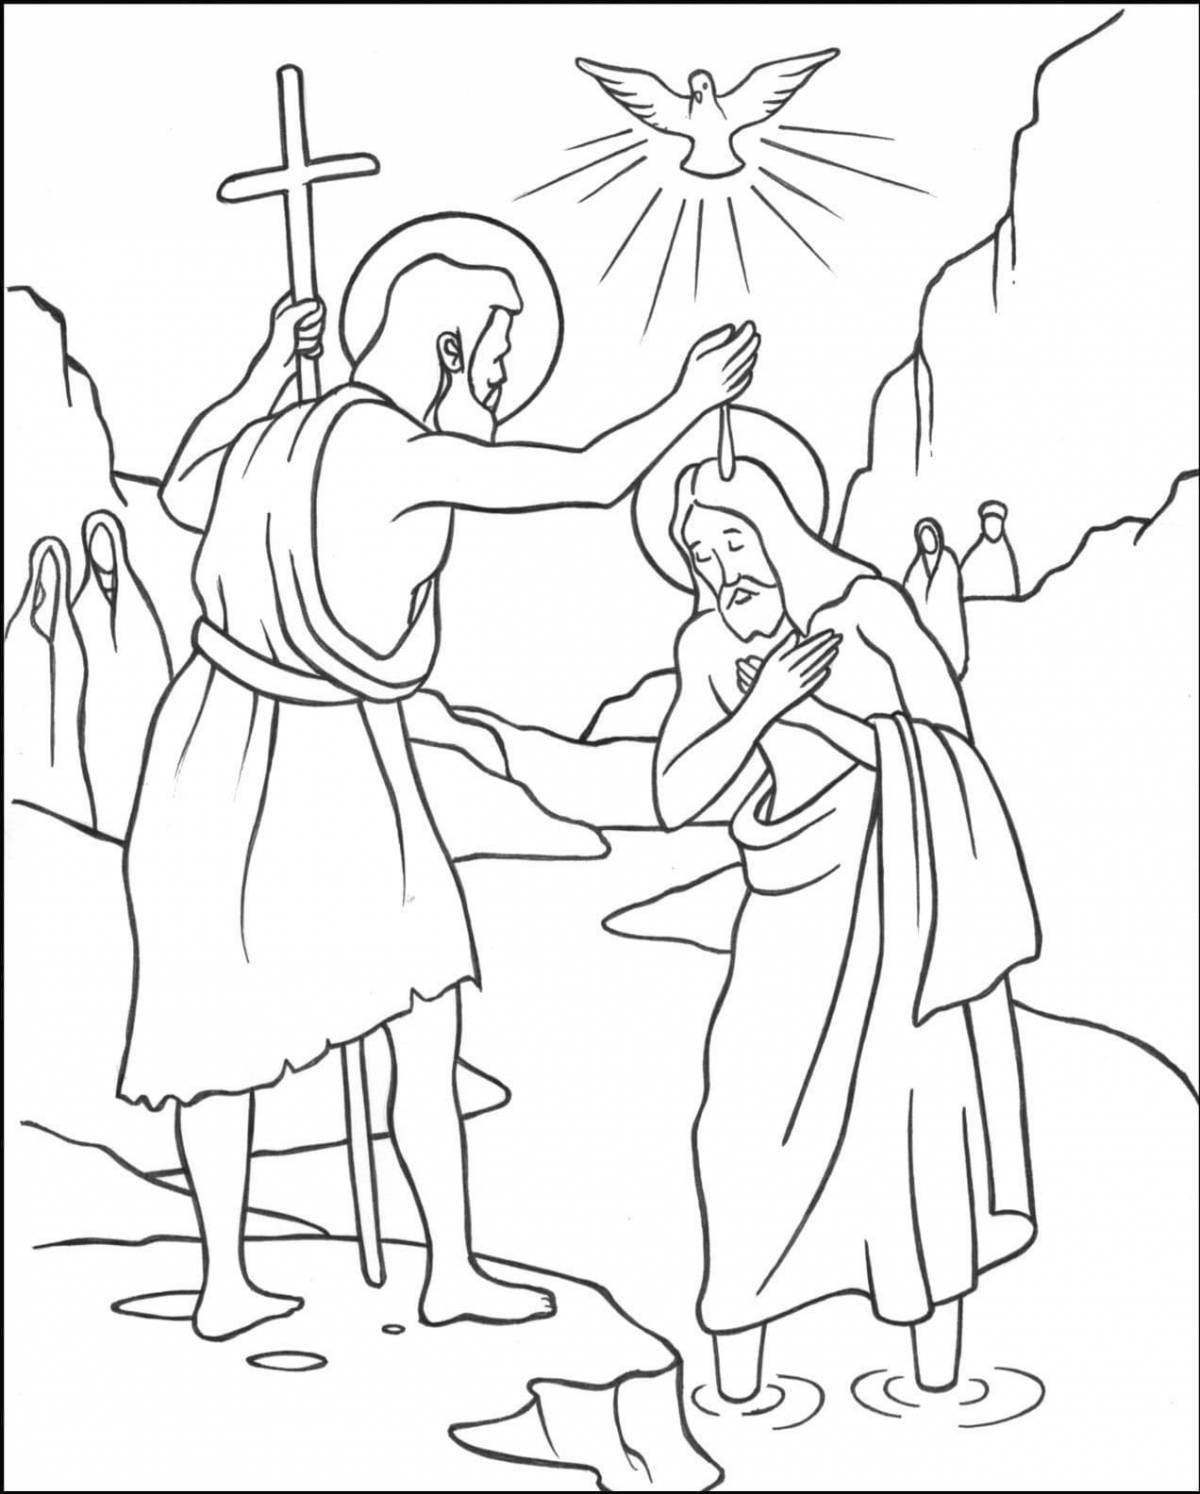 Coloring page cheerful baptism of the Lord